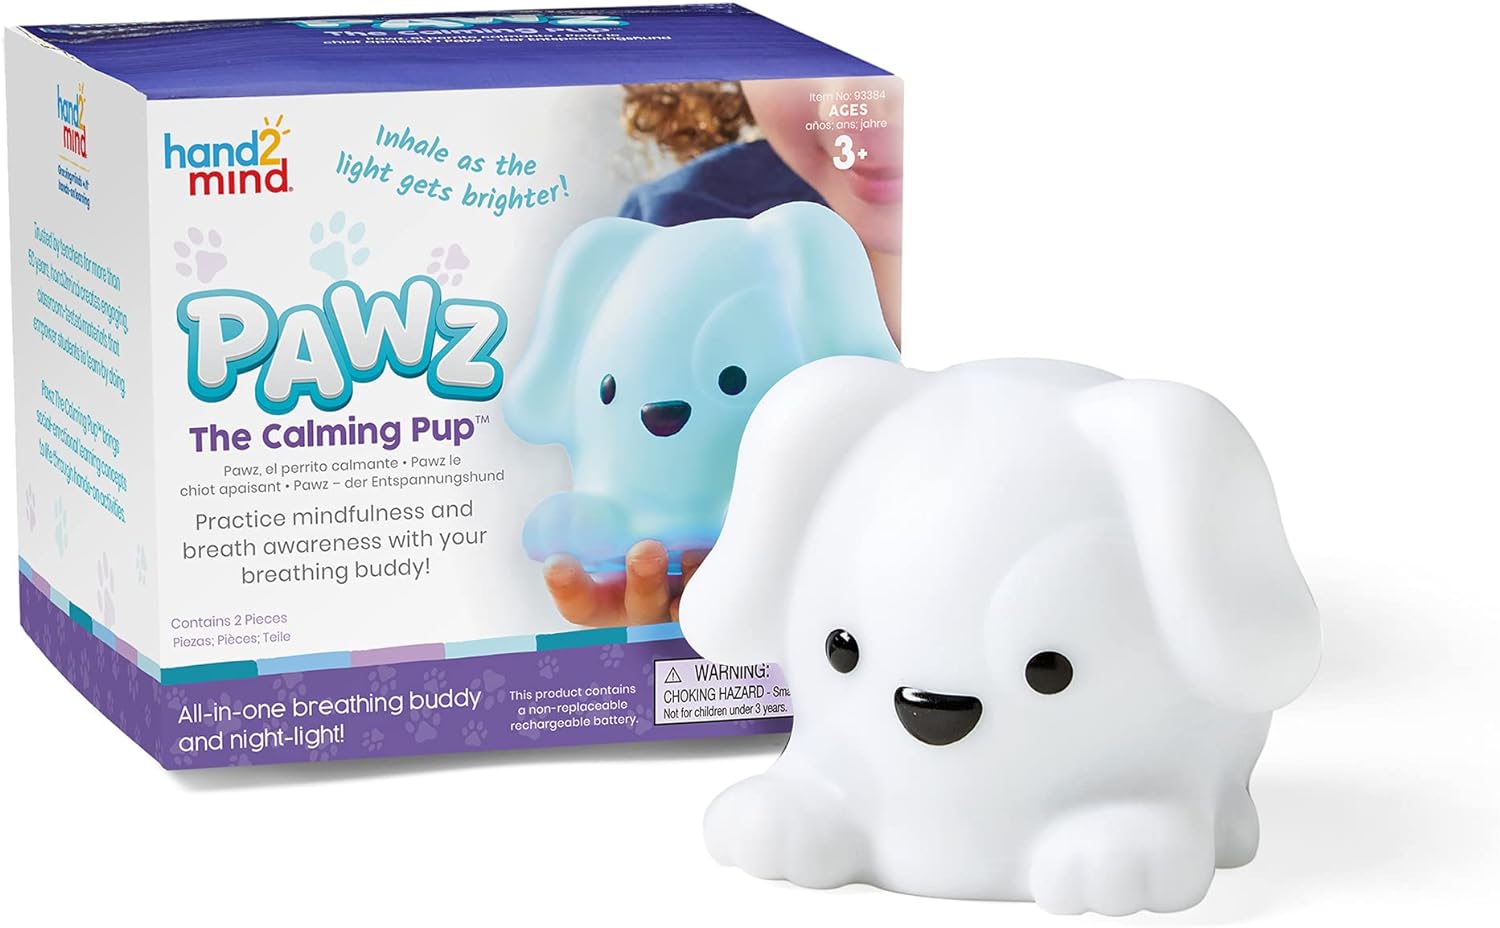 hand2mind PAWZ The Calming Pup, Learn Deep Breathing, Rechargeable Animal Night Light, Kids Anxiety Relief, Mindfulness for Kids